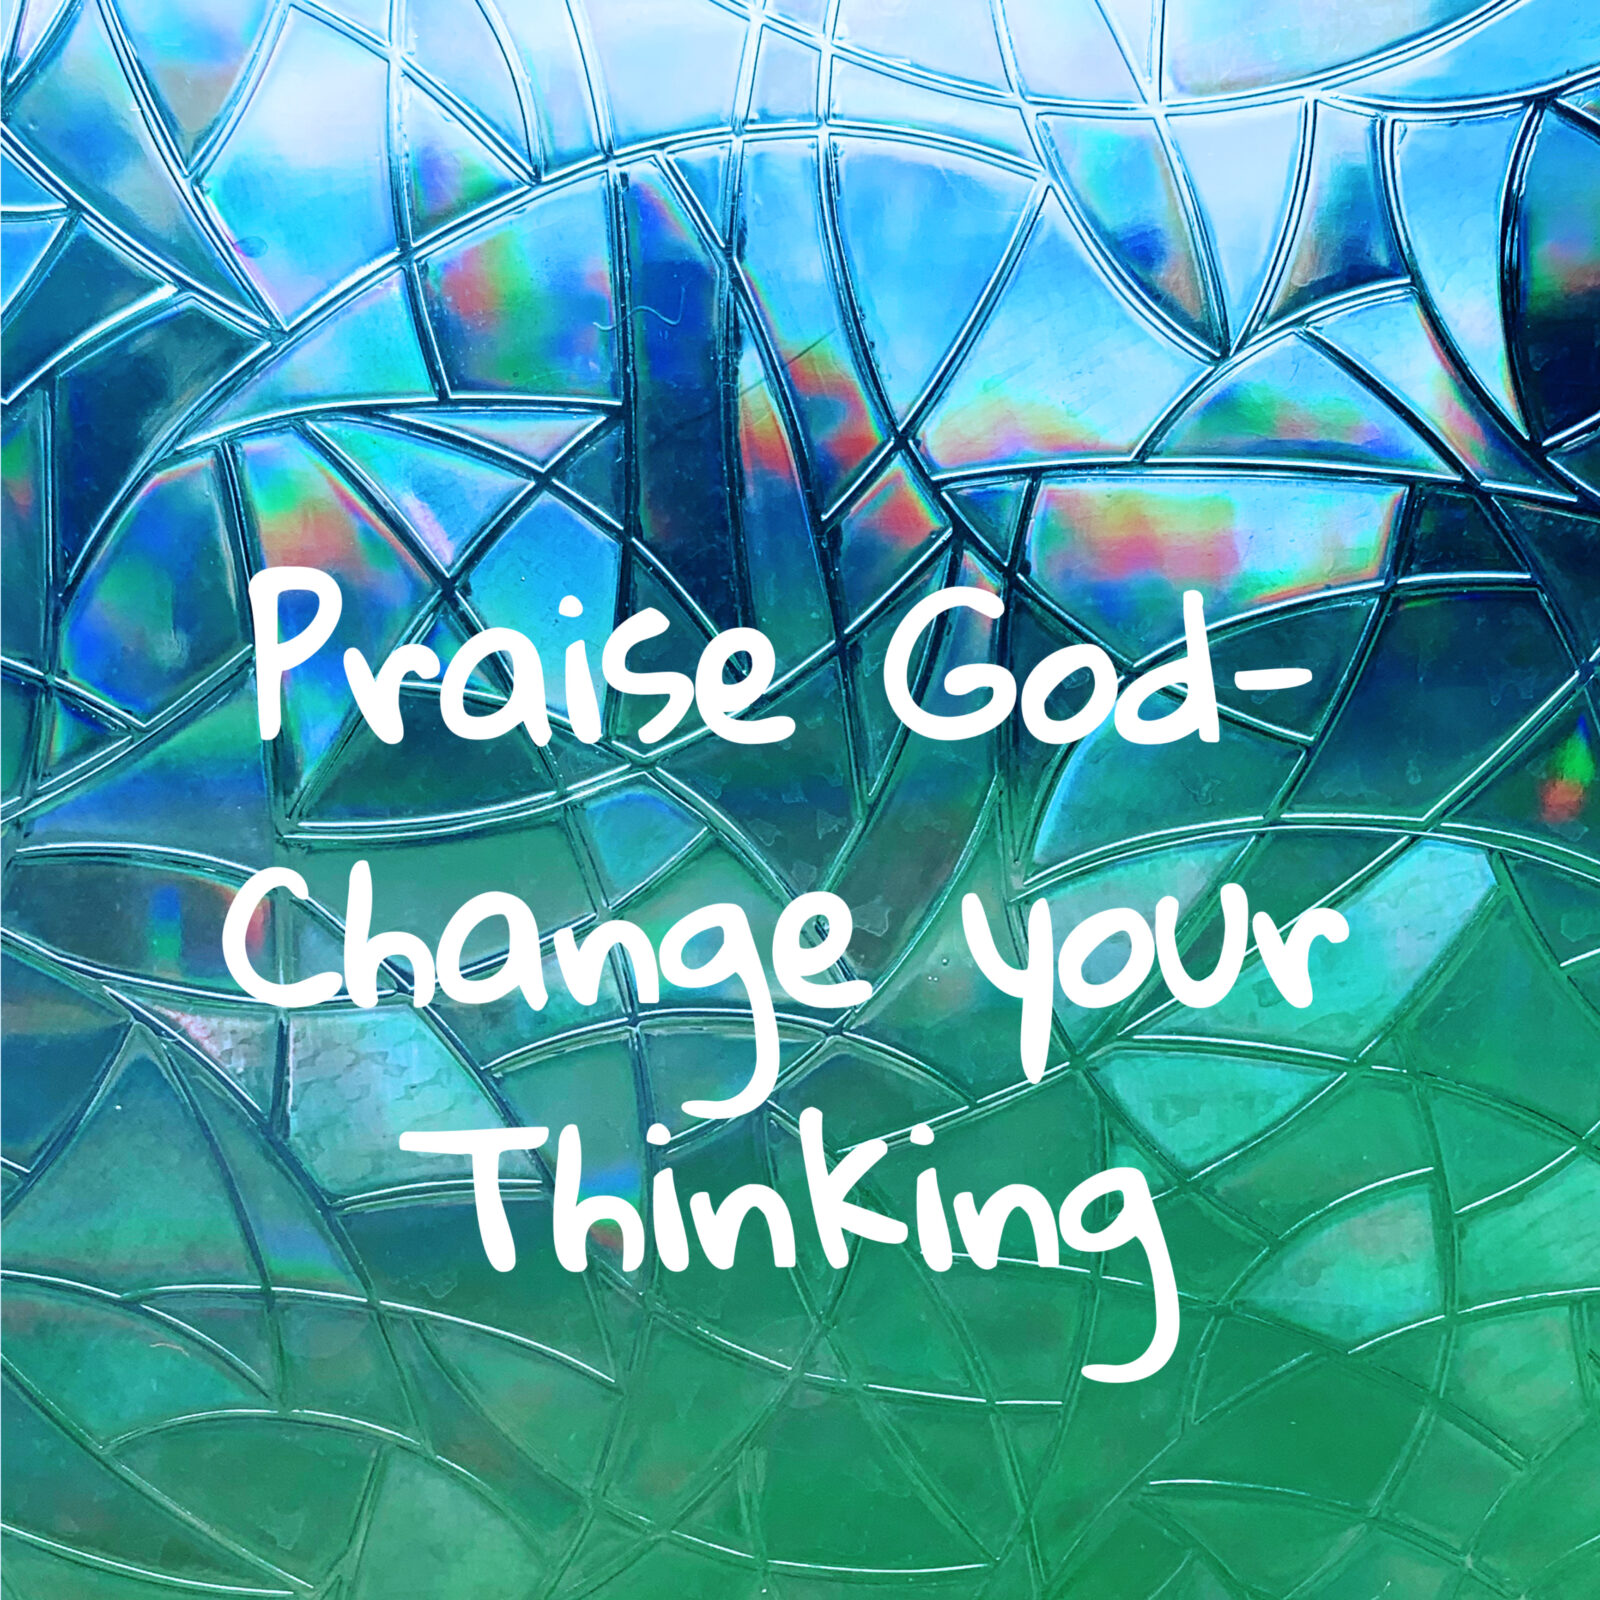 How to Praise God and Change your thinking